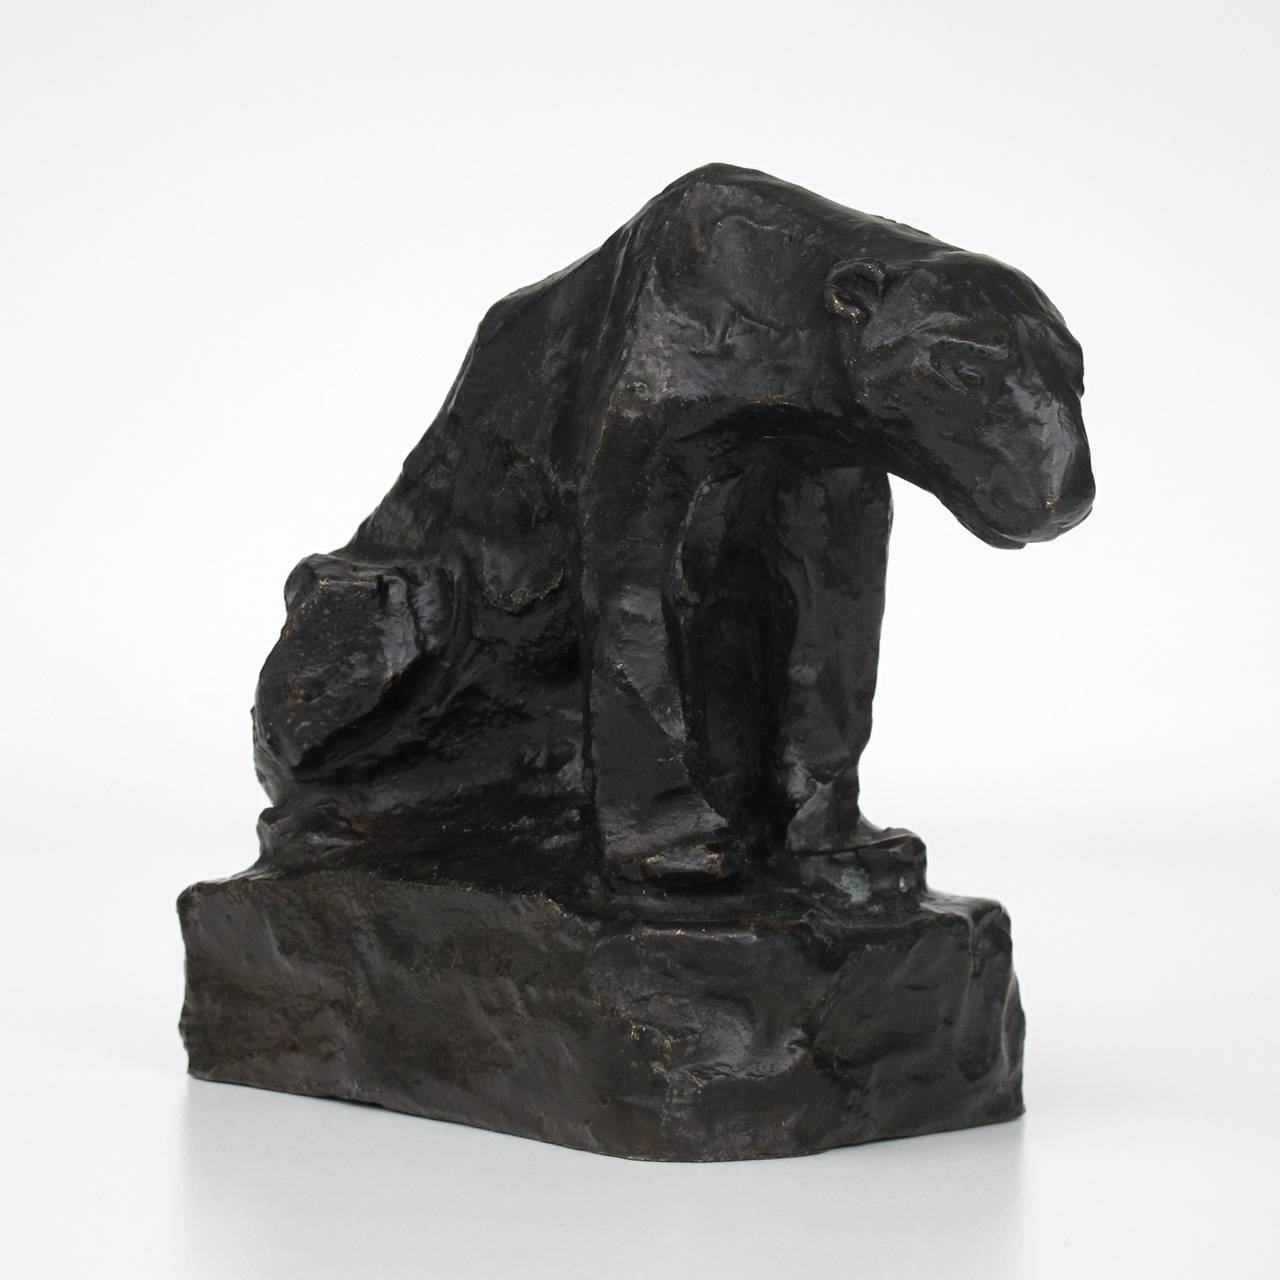 Wonderfully modelled bronze sculpture of a sitting ice bear by Lambertus Zijl, made for the renowned art dealer Nieuwenhuizen Segaar. The piece (2/15) is in an excellent condition and signed with both the artist’s monogram as the art dealer's